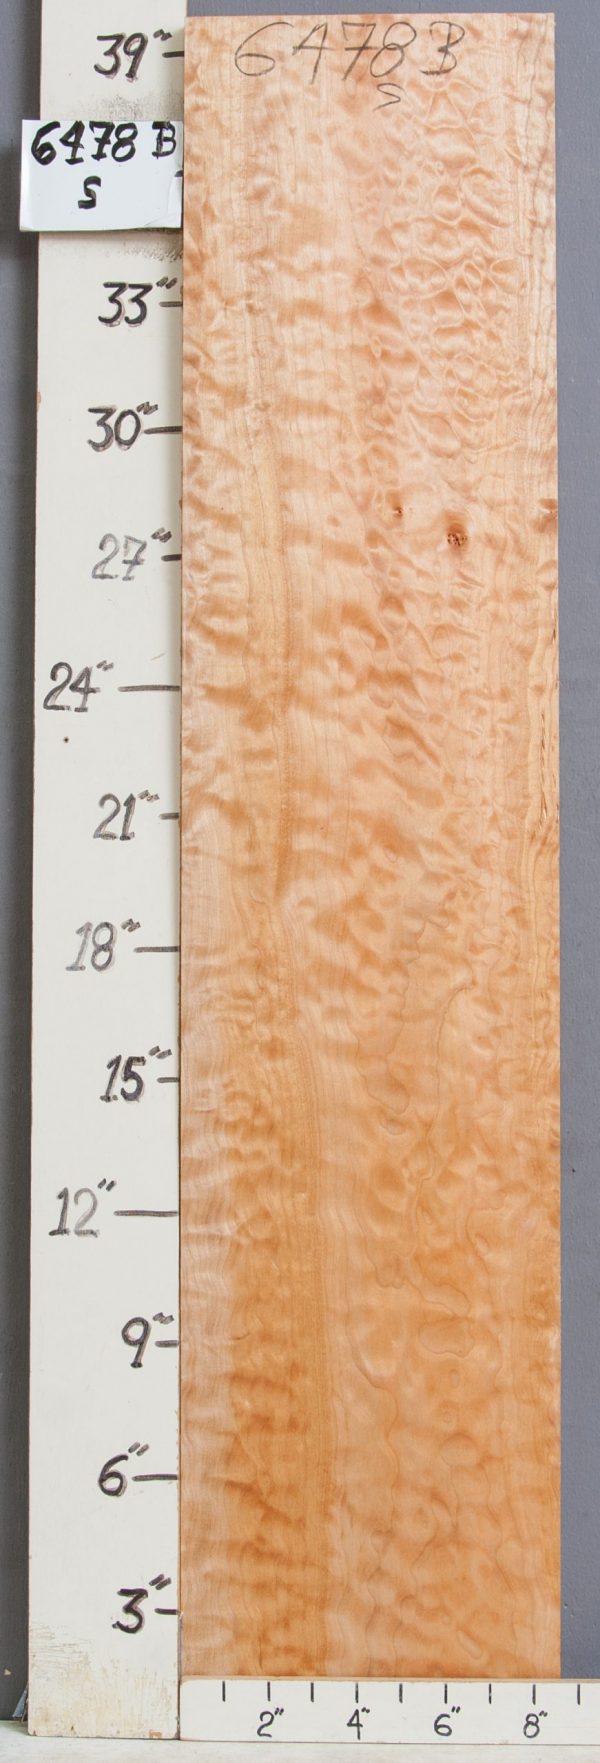 QUILTED MAPLE BLOCK 8"1/2 X 39" X 1"1/8 (NWT-6478B)